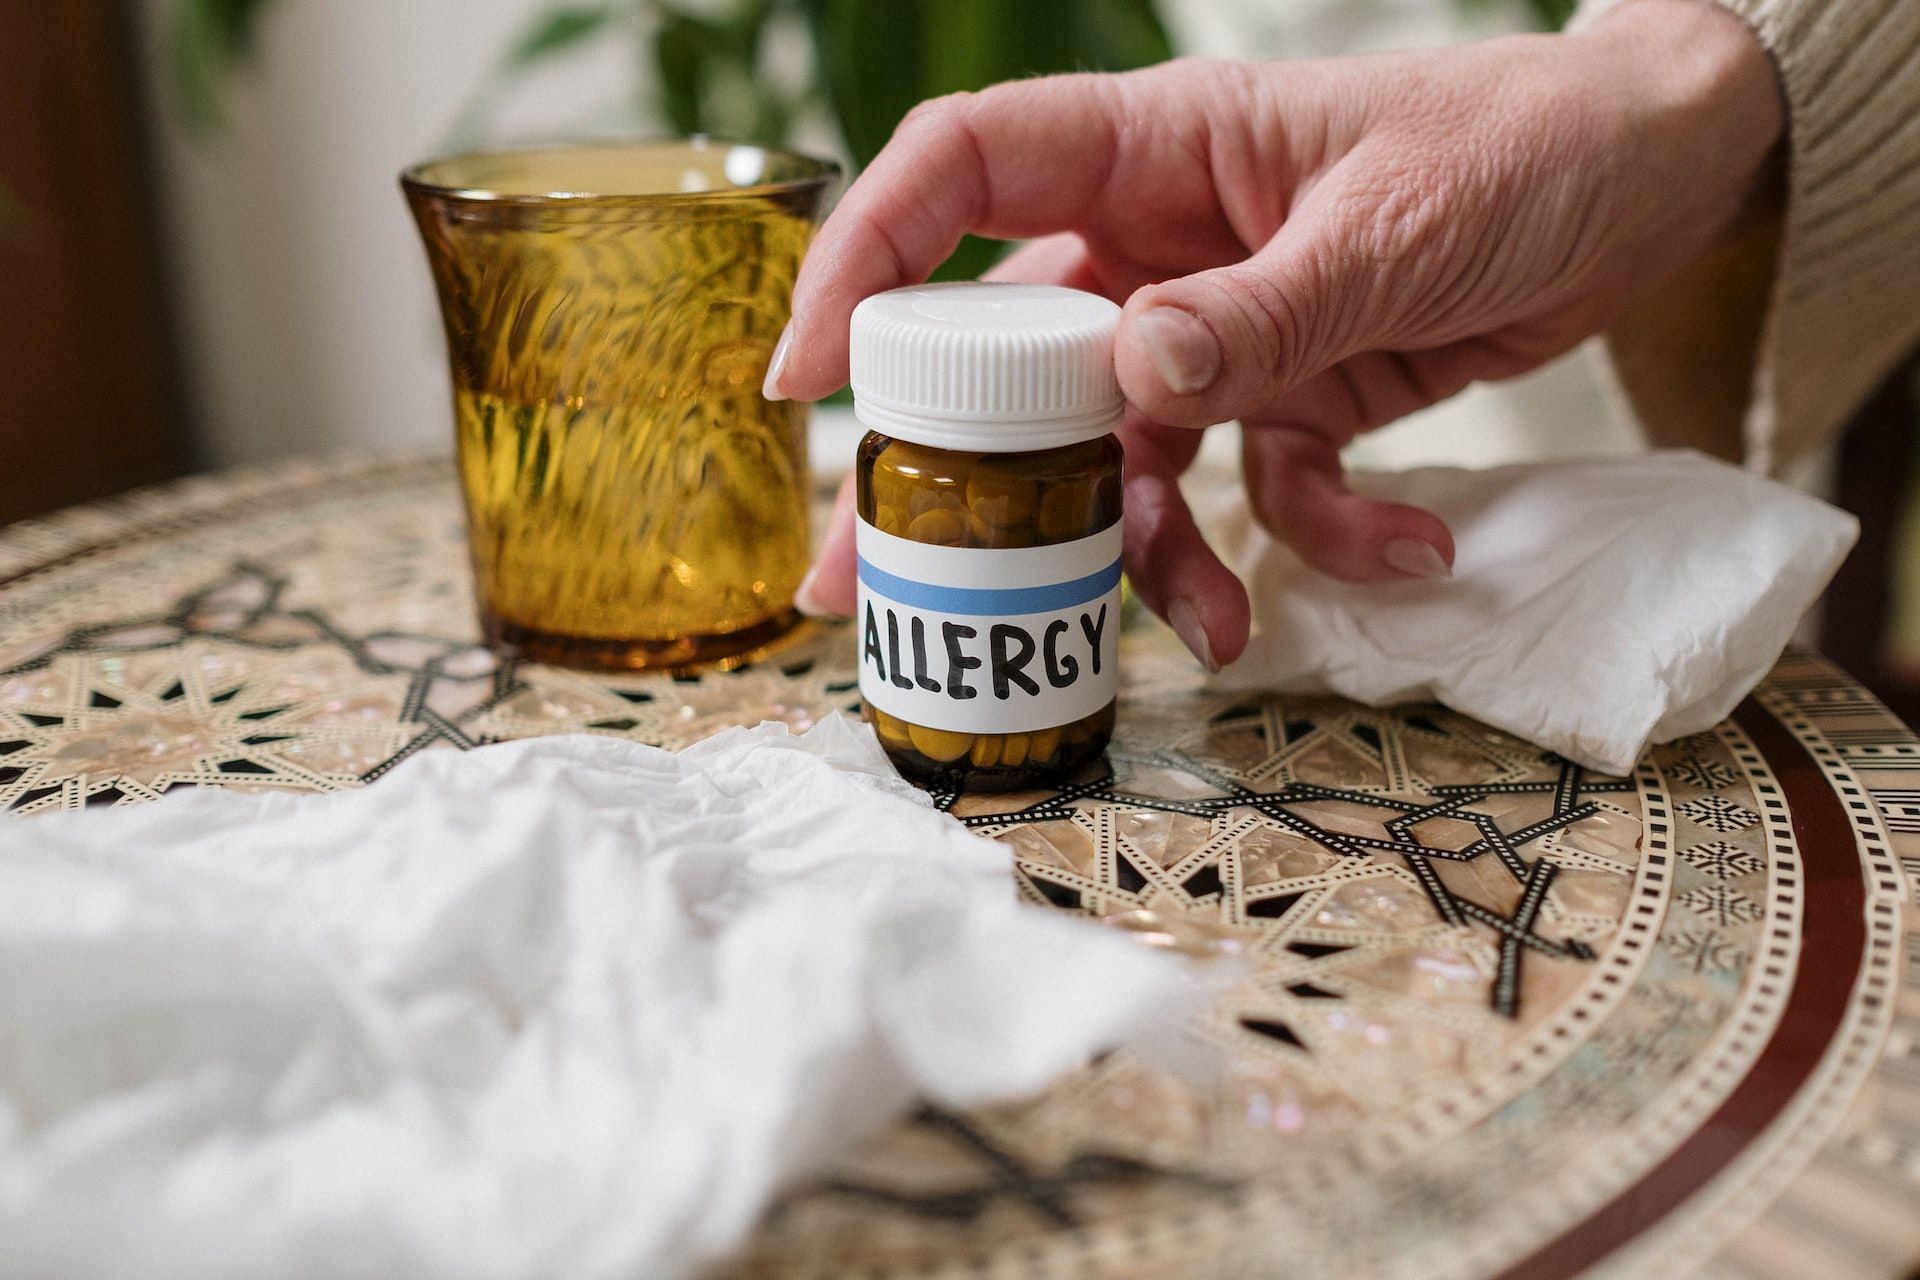 Certain allergies can cause itchy ankles. (Image via Pexels/cottonbro studio)